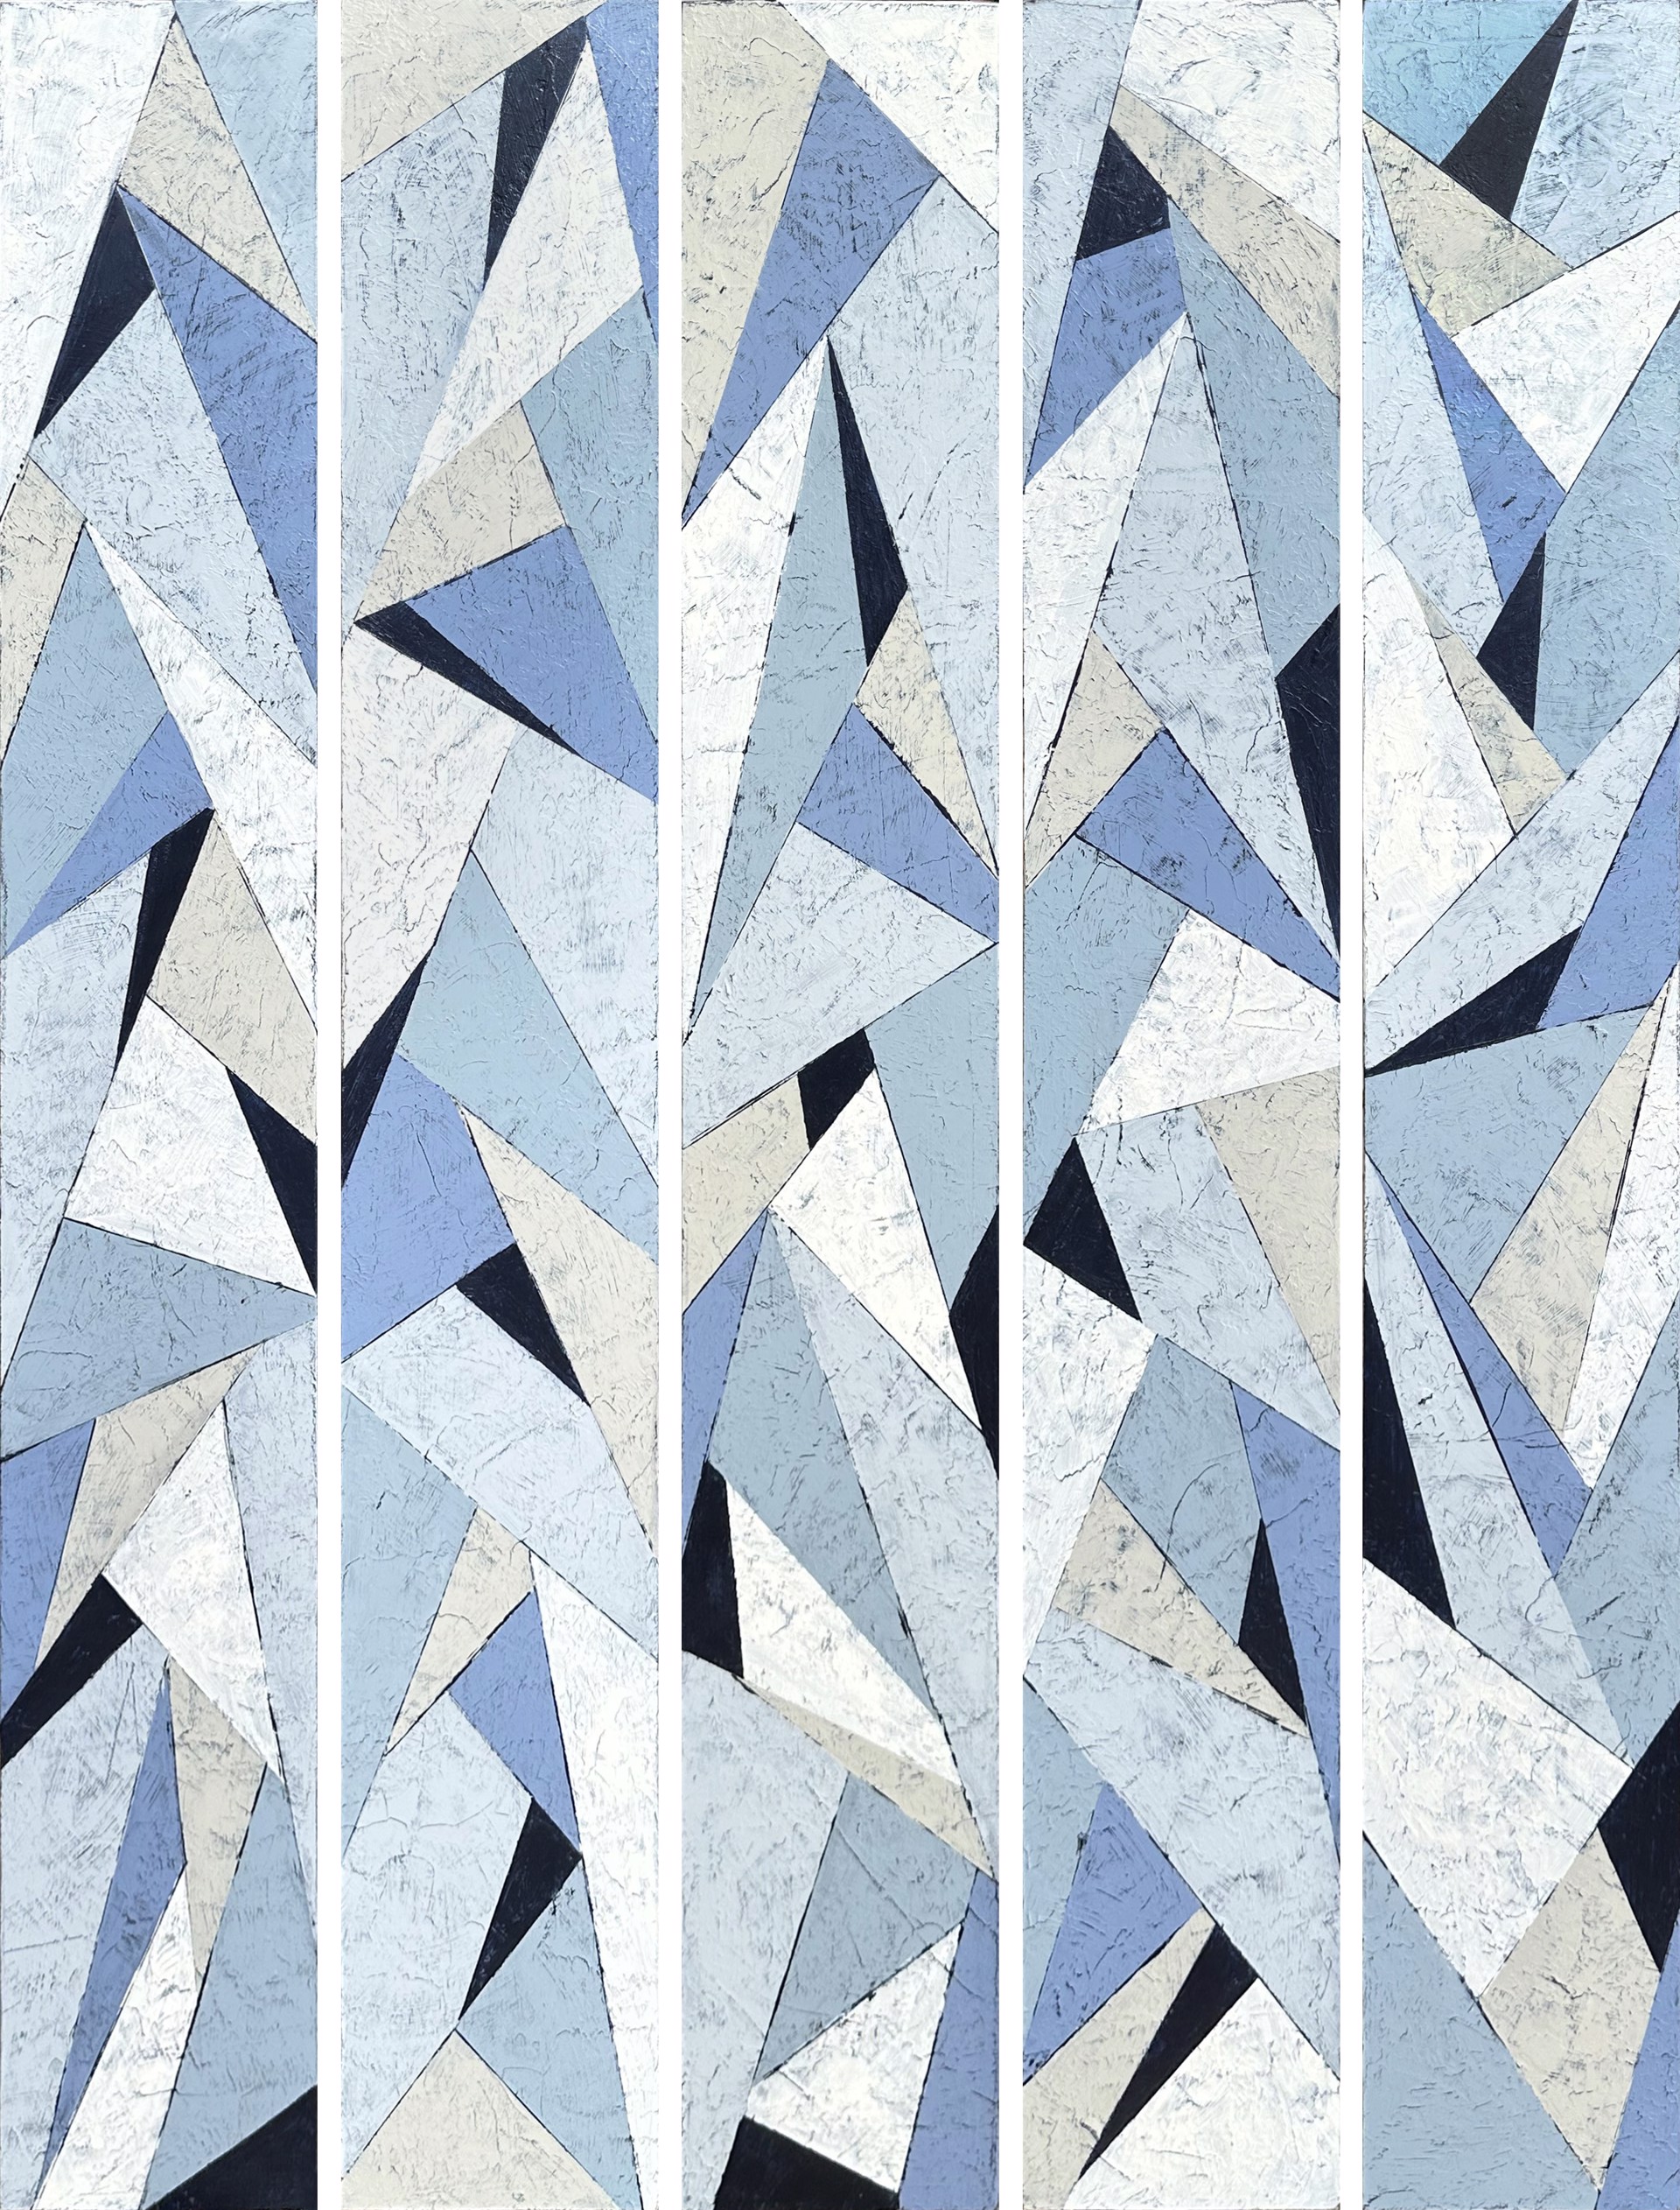 Five narrow panels featuring geometric patterns in different coastal colors